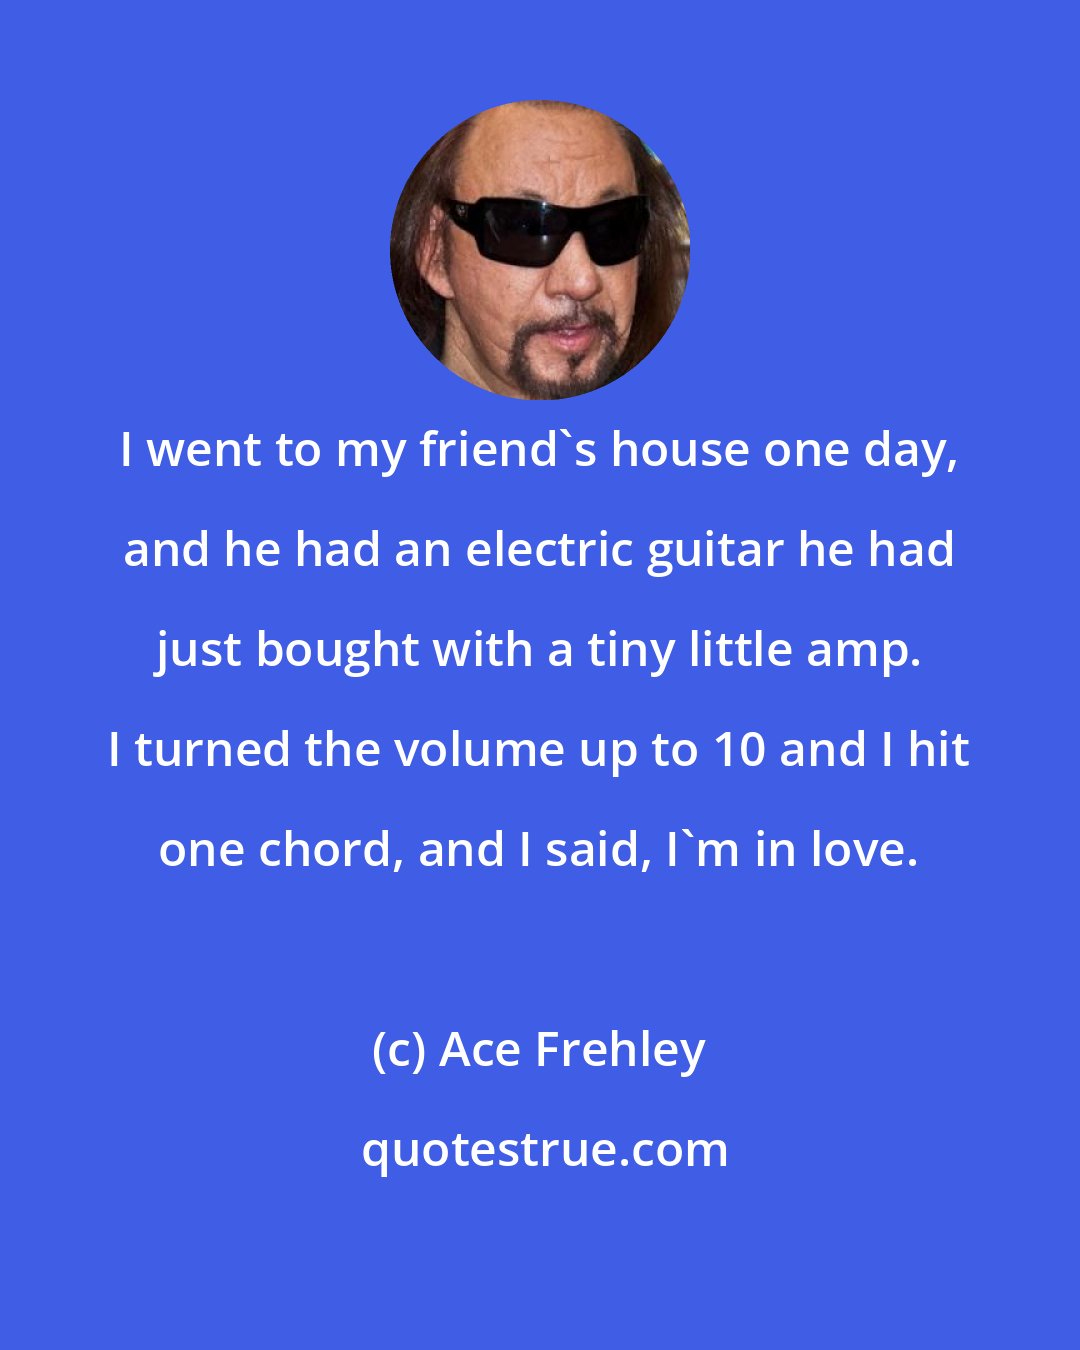 Ace Frehley: I went to my friend's house one day, and he had an electric guitar he had just bought with a tiny little amp. I turned the volume up to 10 and I hit one chord, and I said, I'm in love.